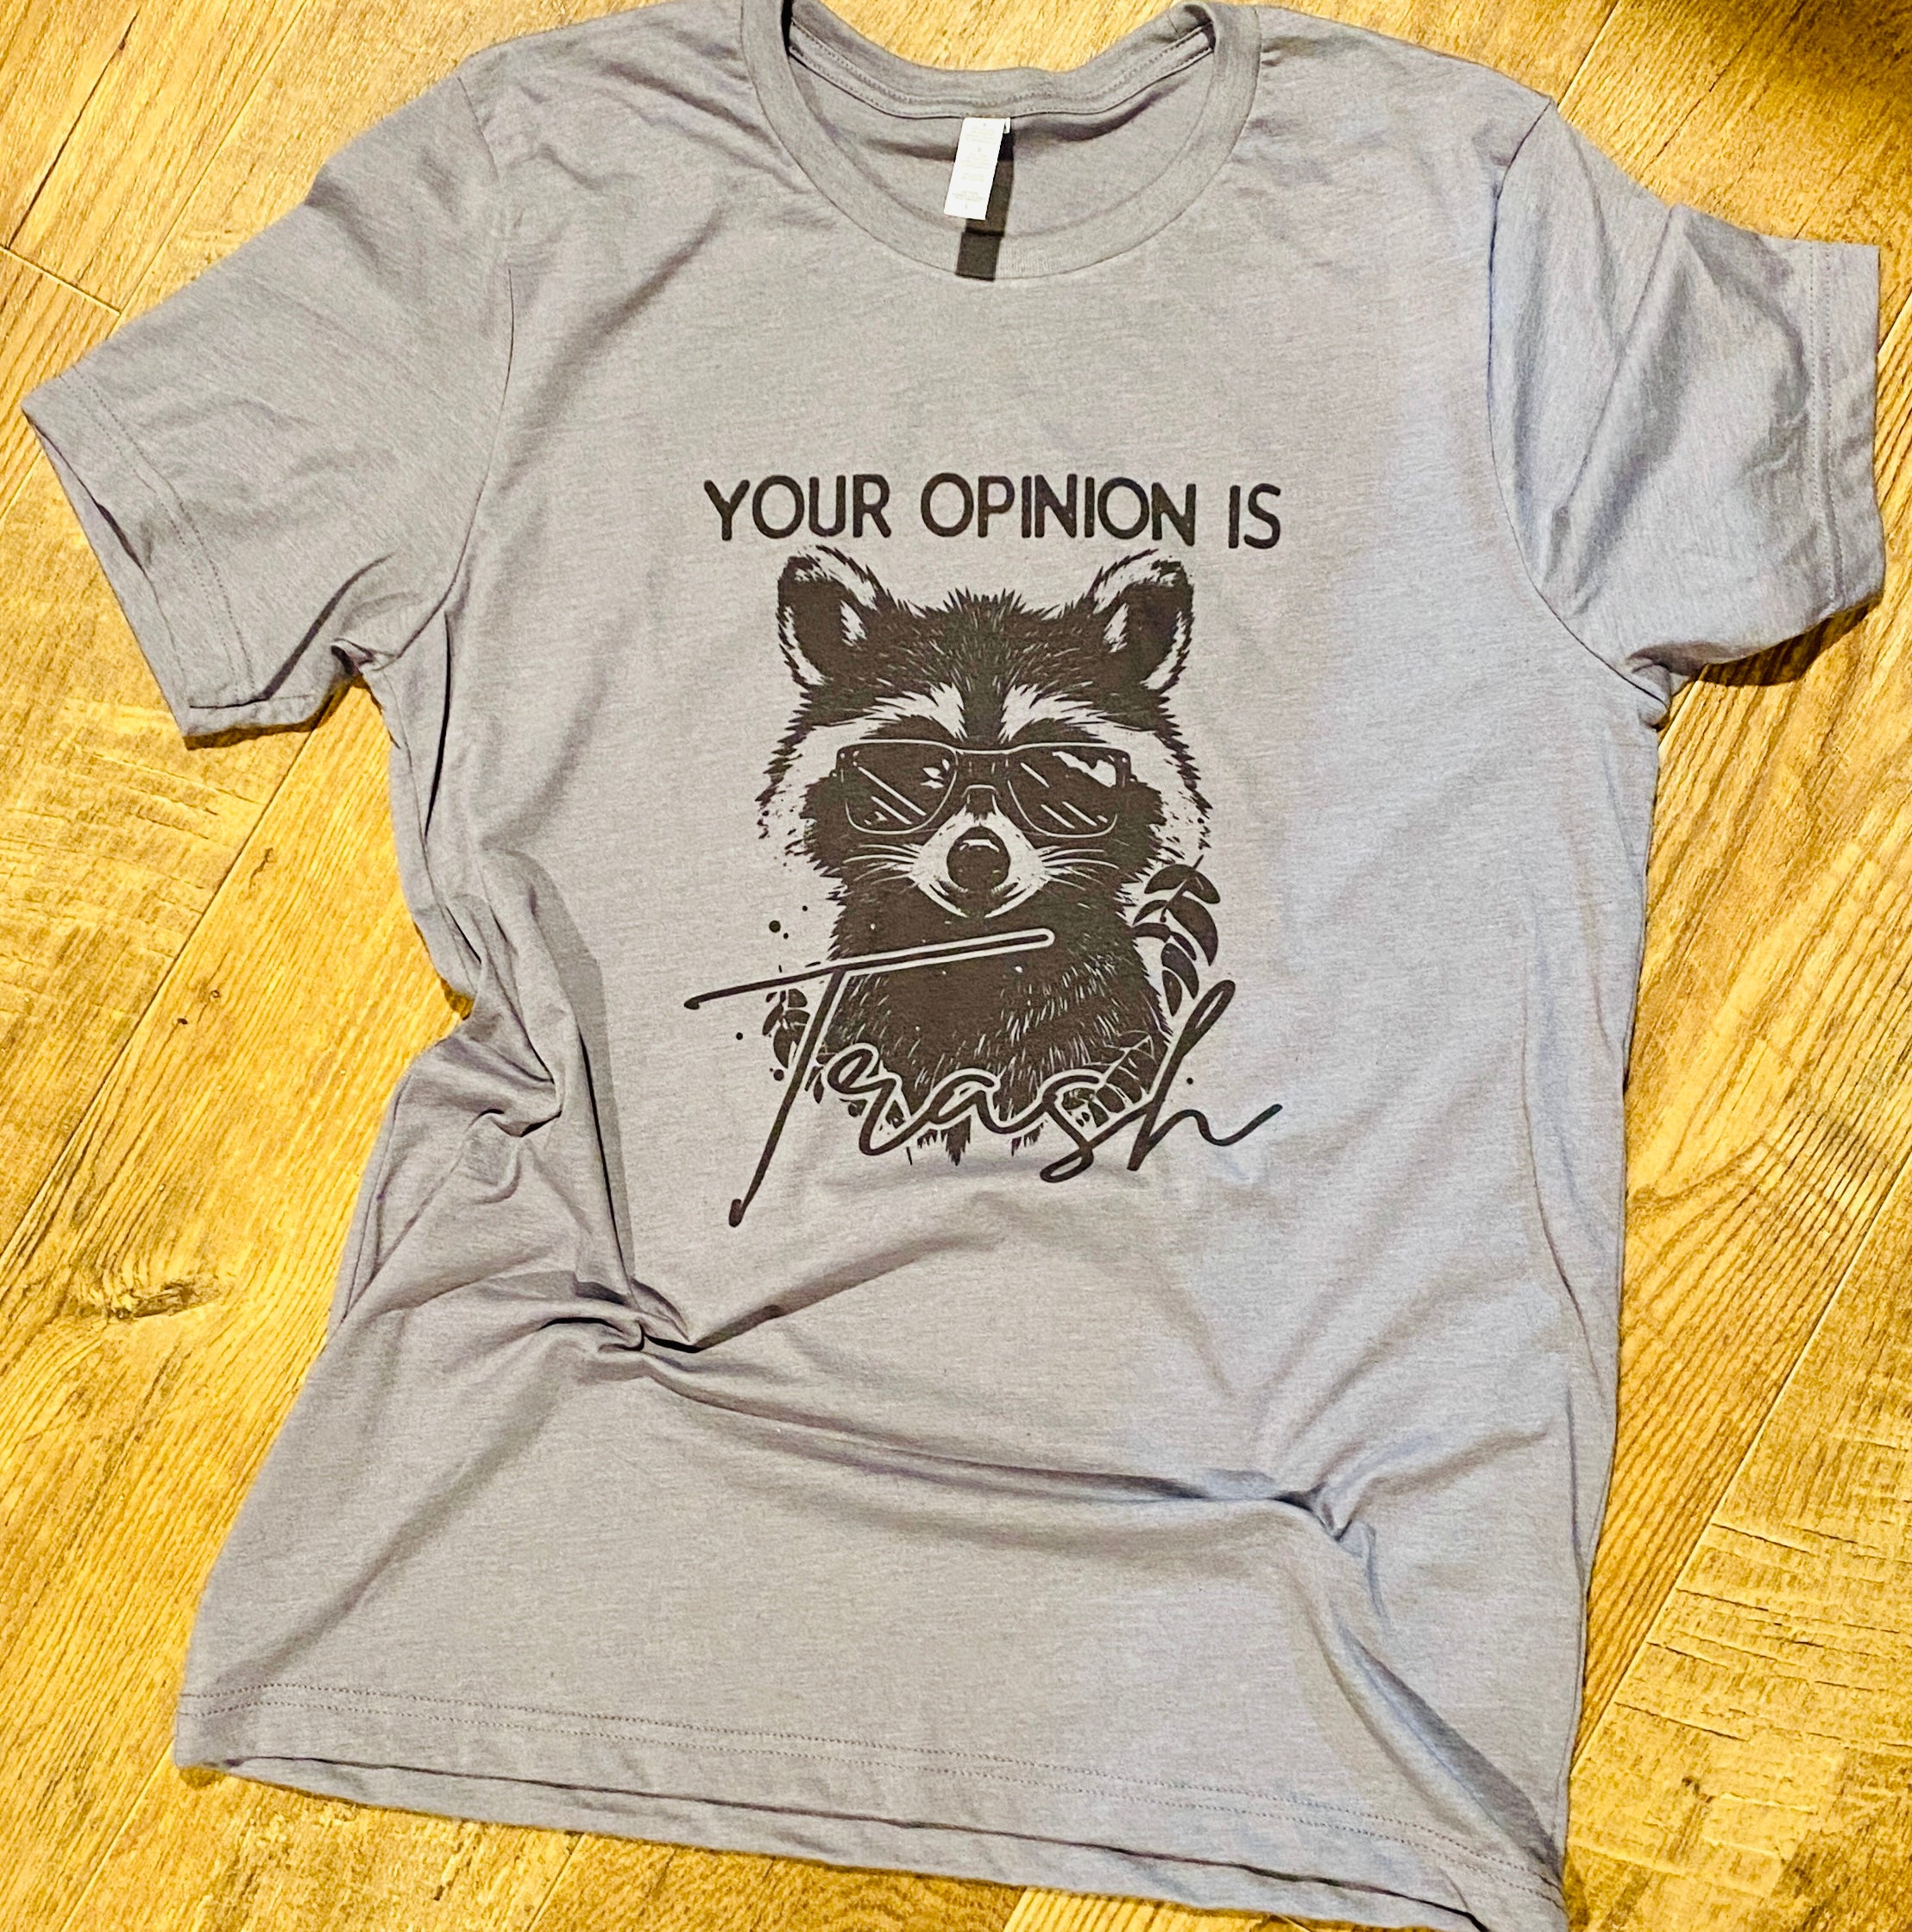 Your Opinion is Trash Tee